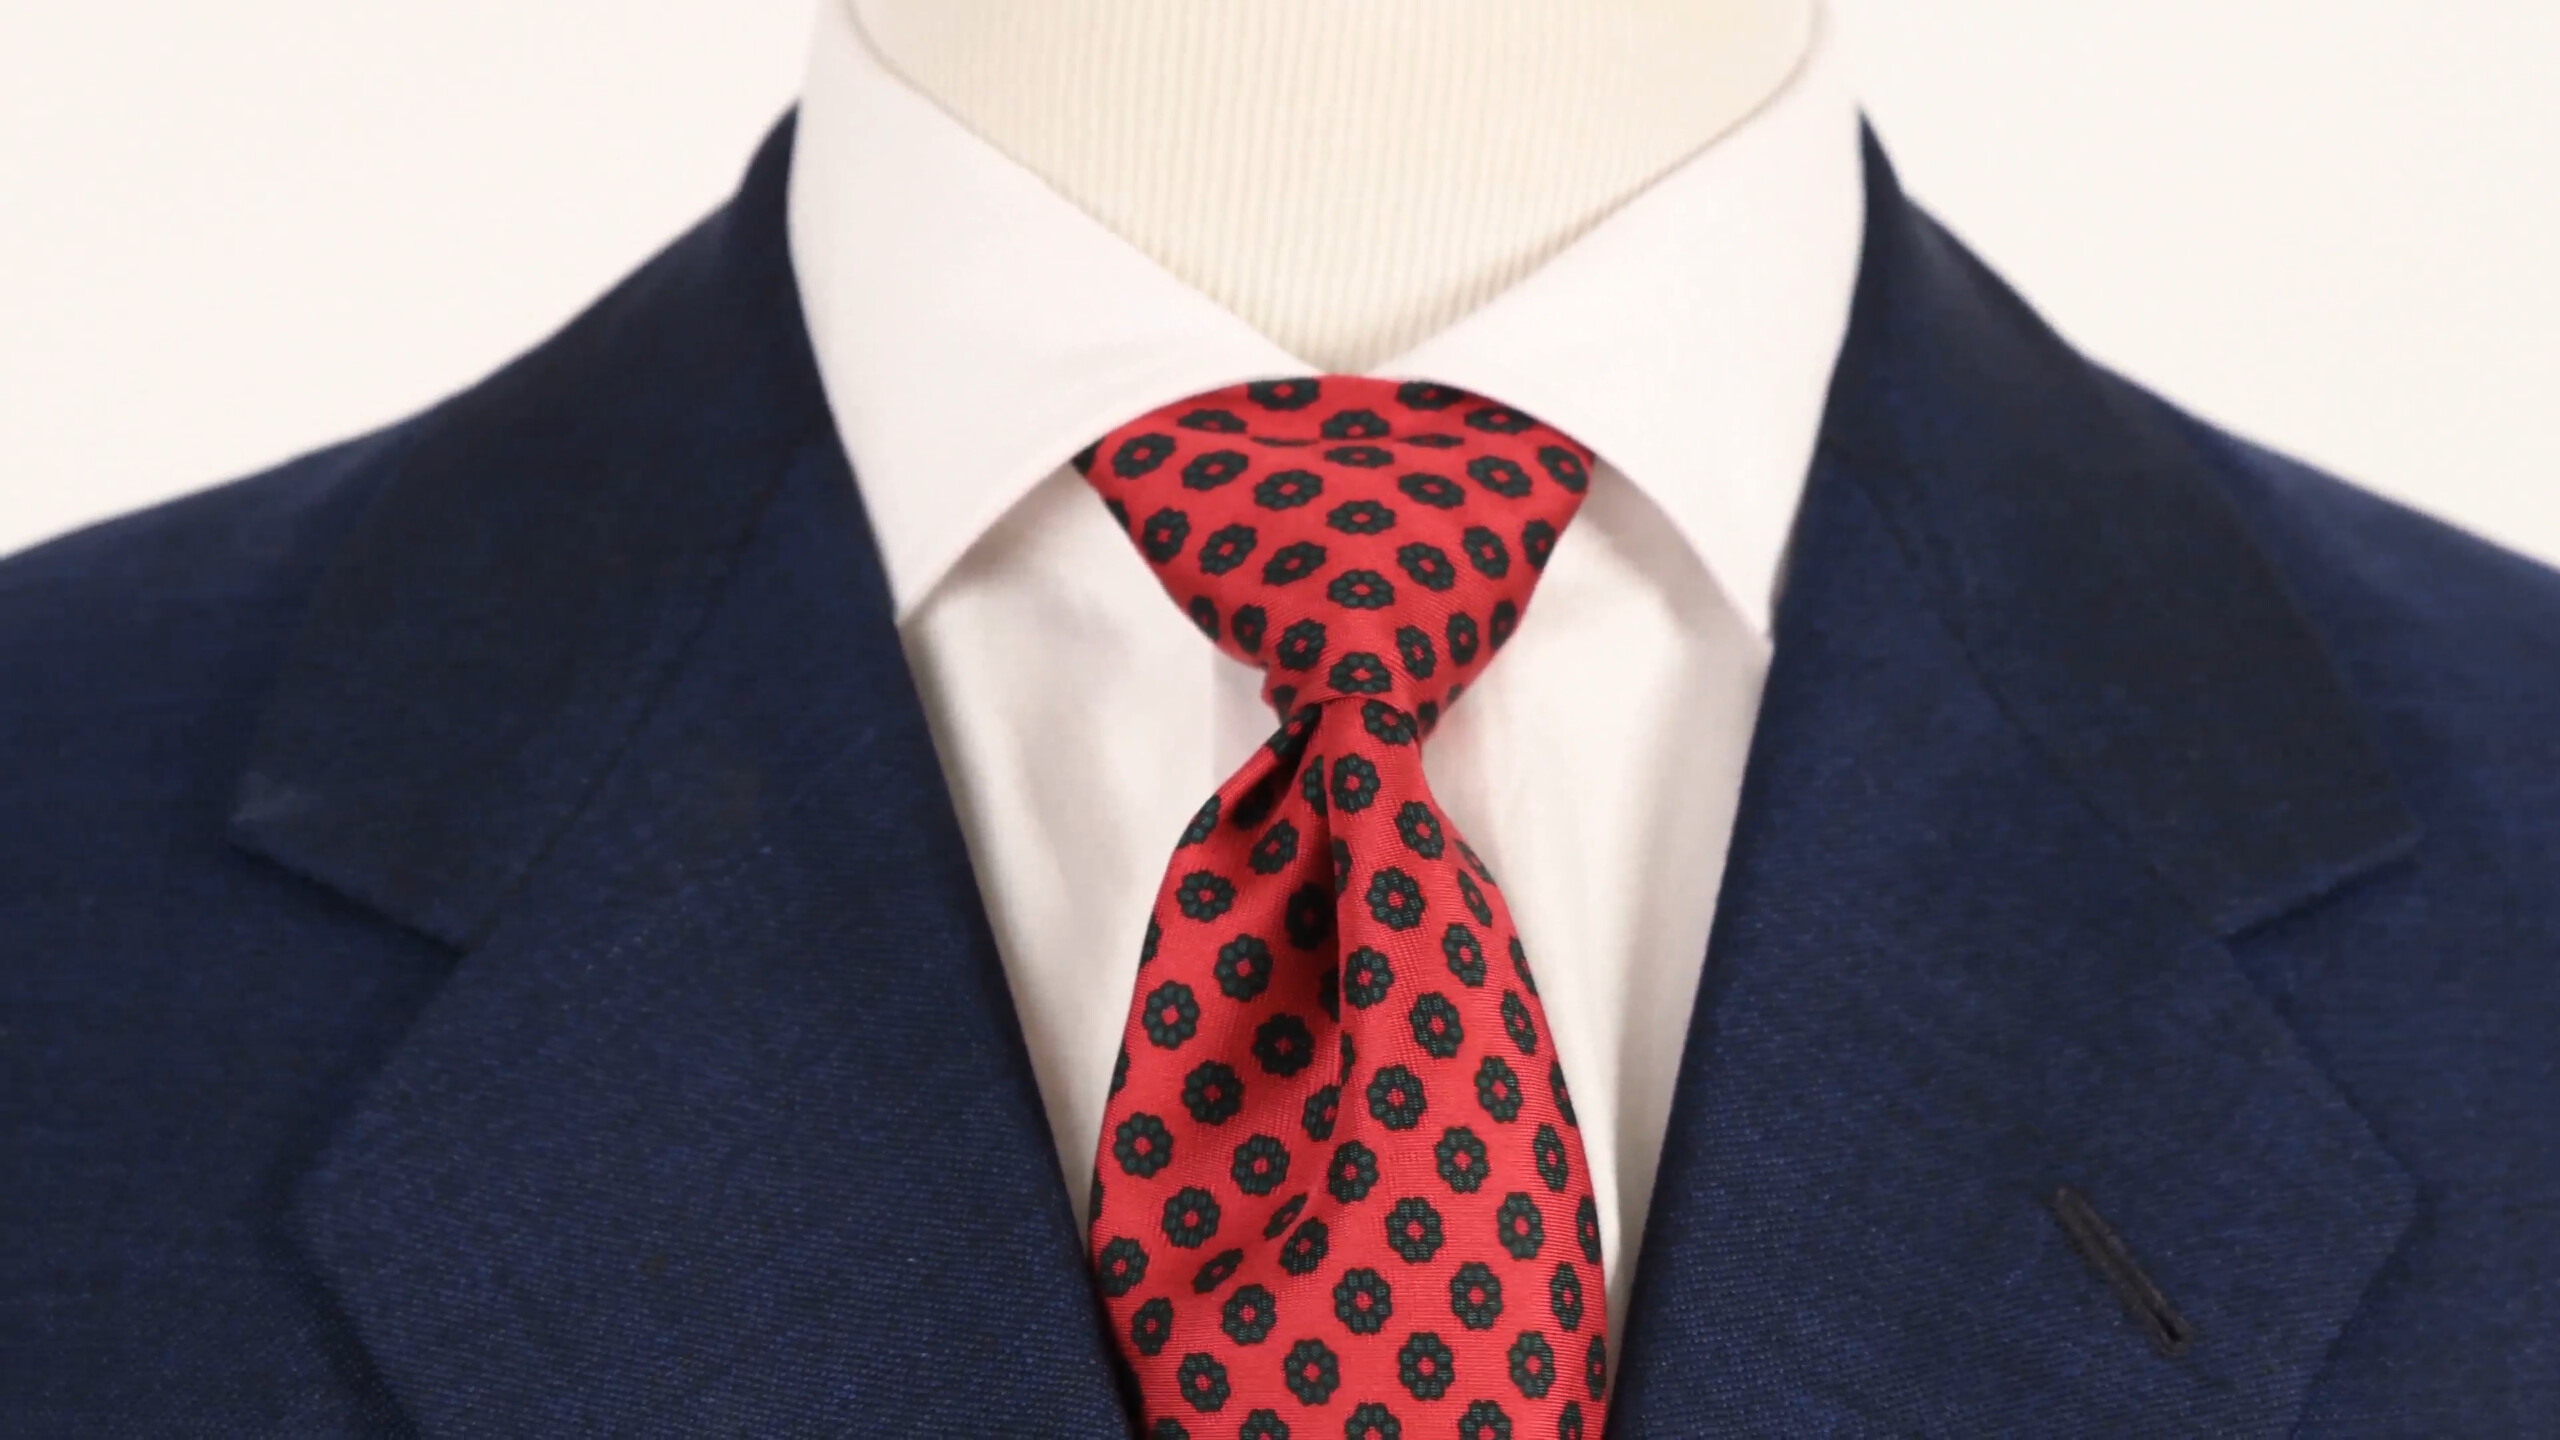 The spread or cutaway collar is the perfect choice for the Half Windsor Knot